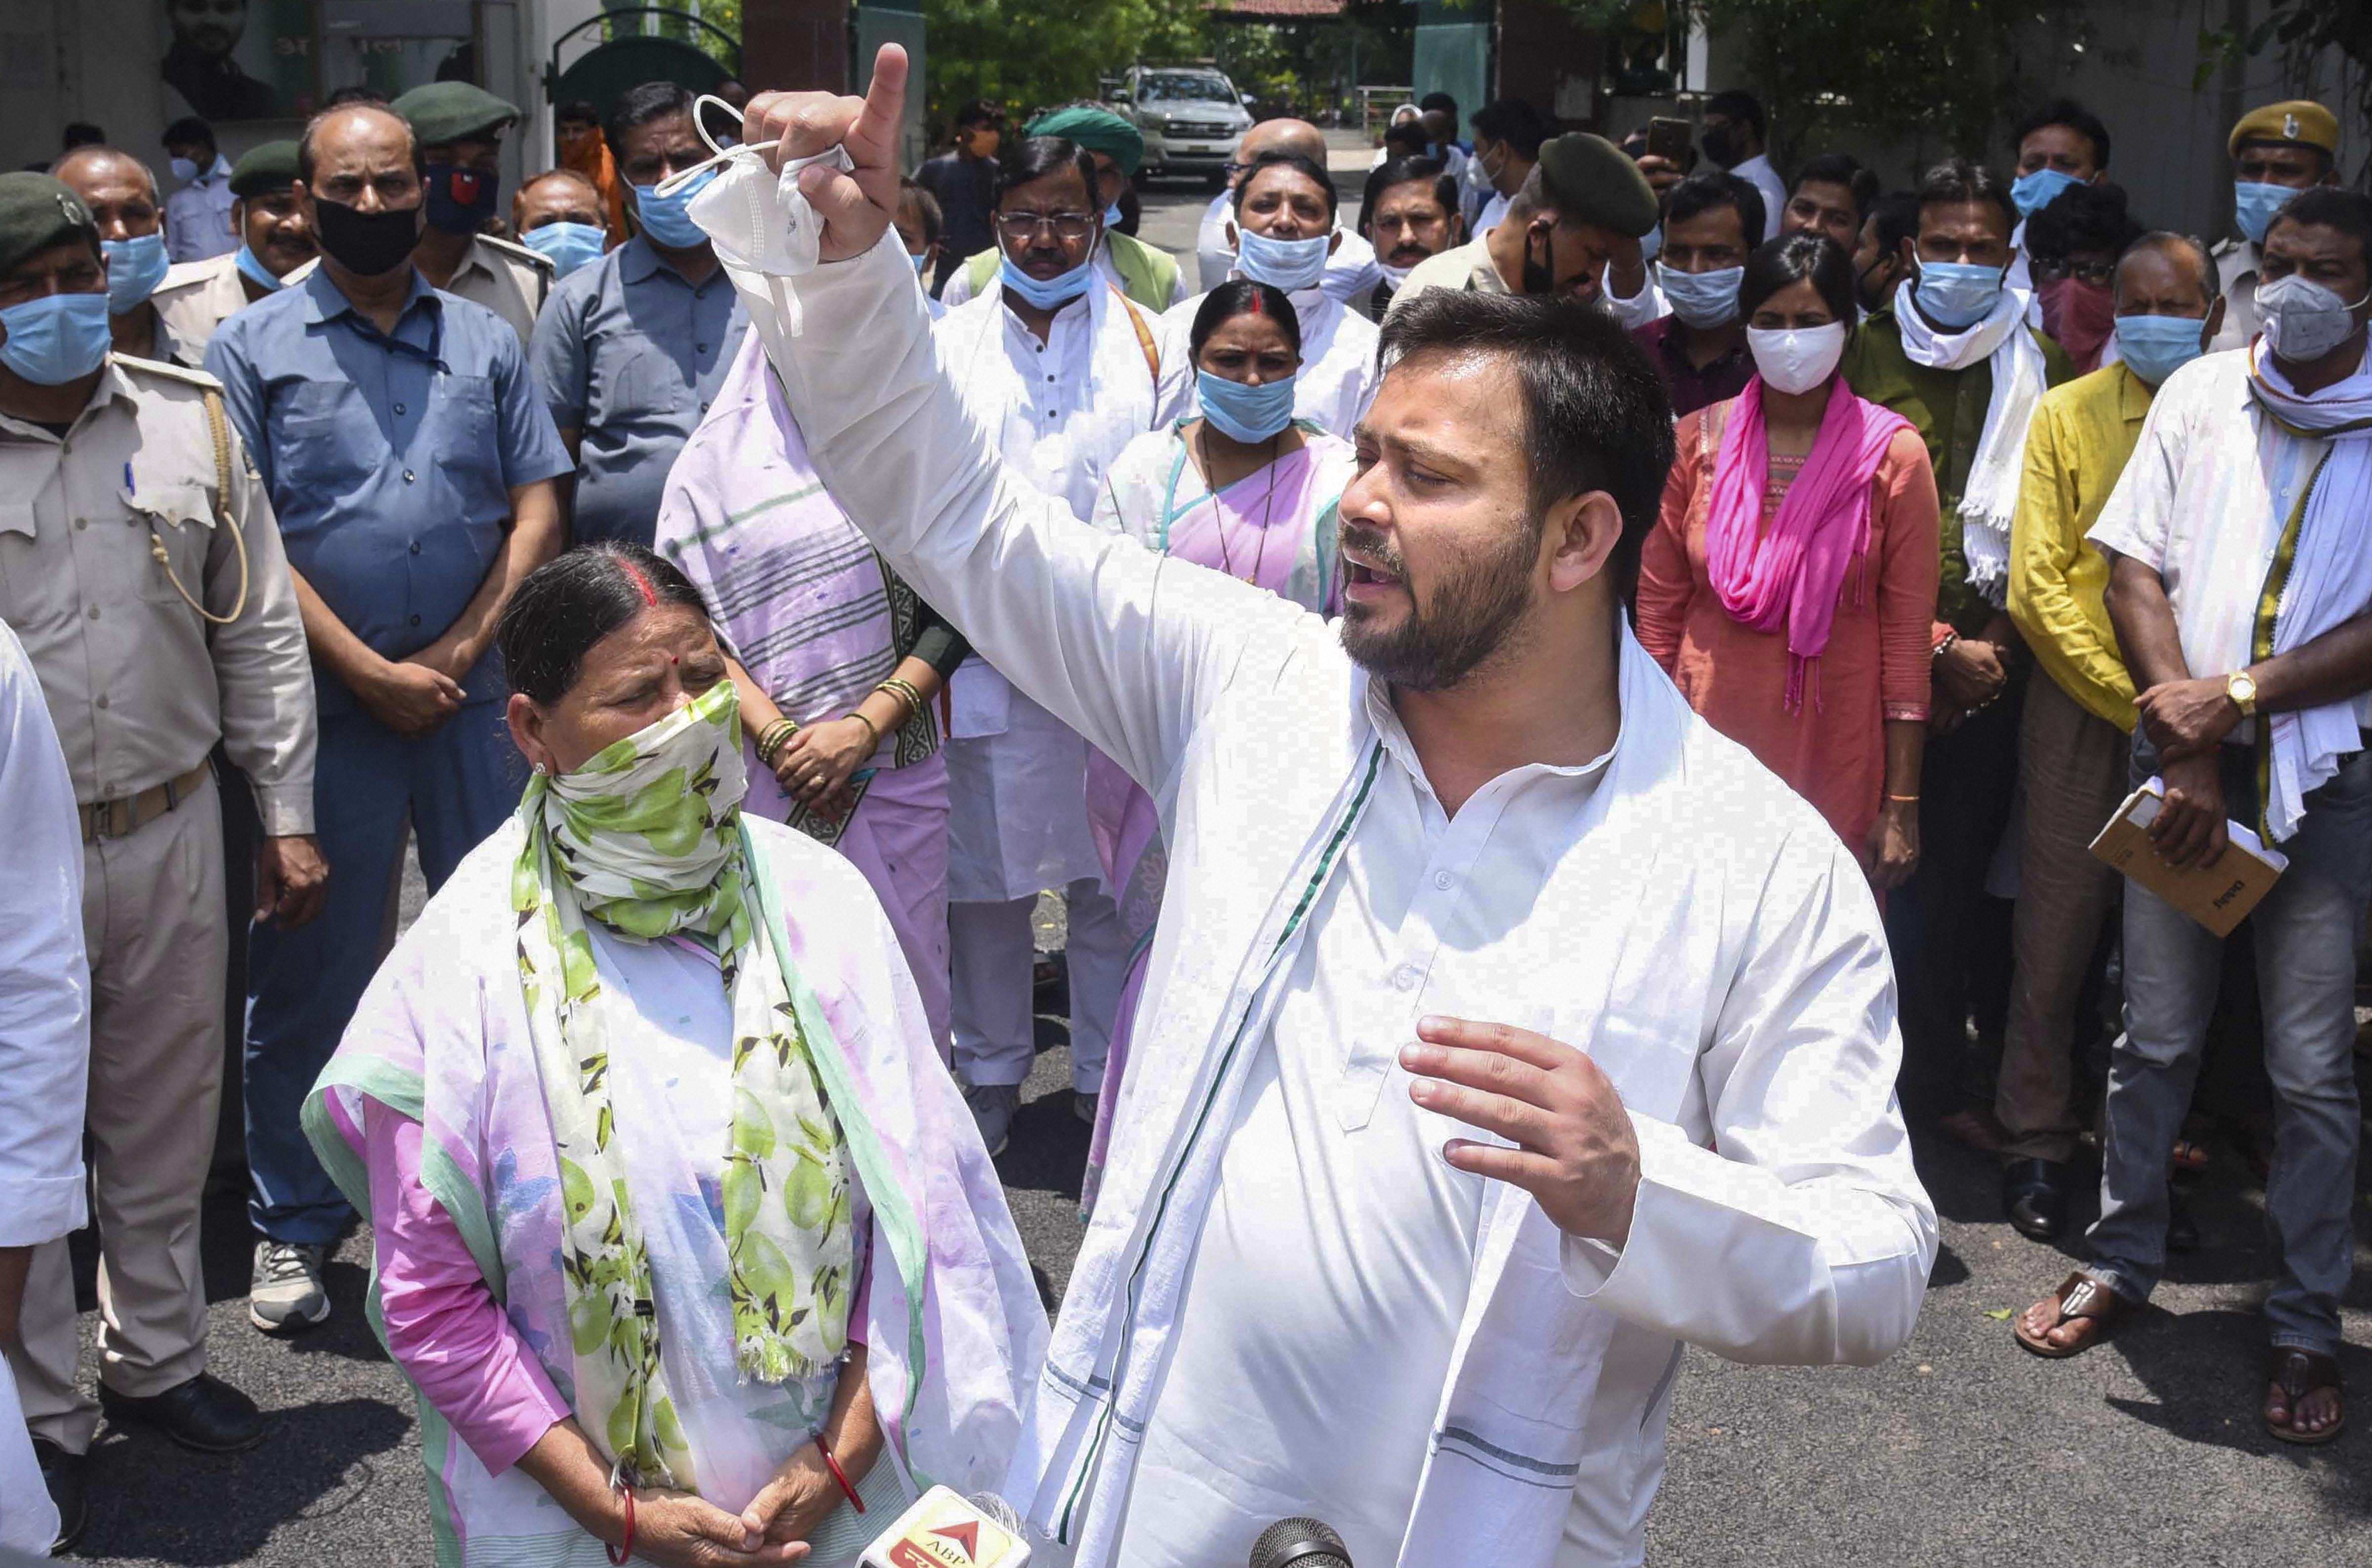 RJD leader Tejashwi Yadav along with his mother and senior leader Rabri Devi talks to the media after a protest against the Bihar government over migrants issues, in Patna, Sunday, June 7, 2020.